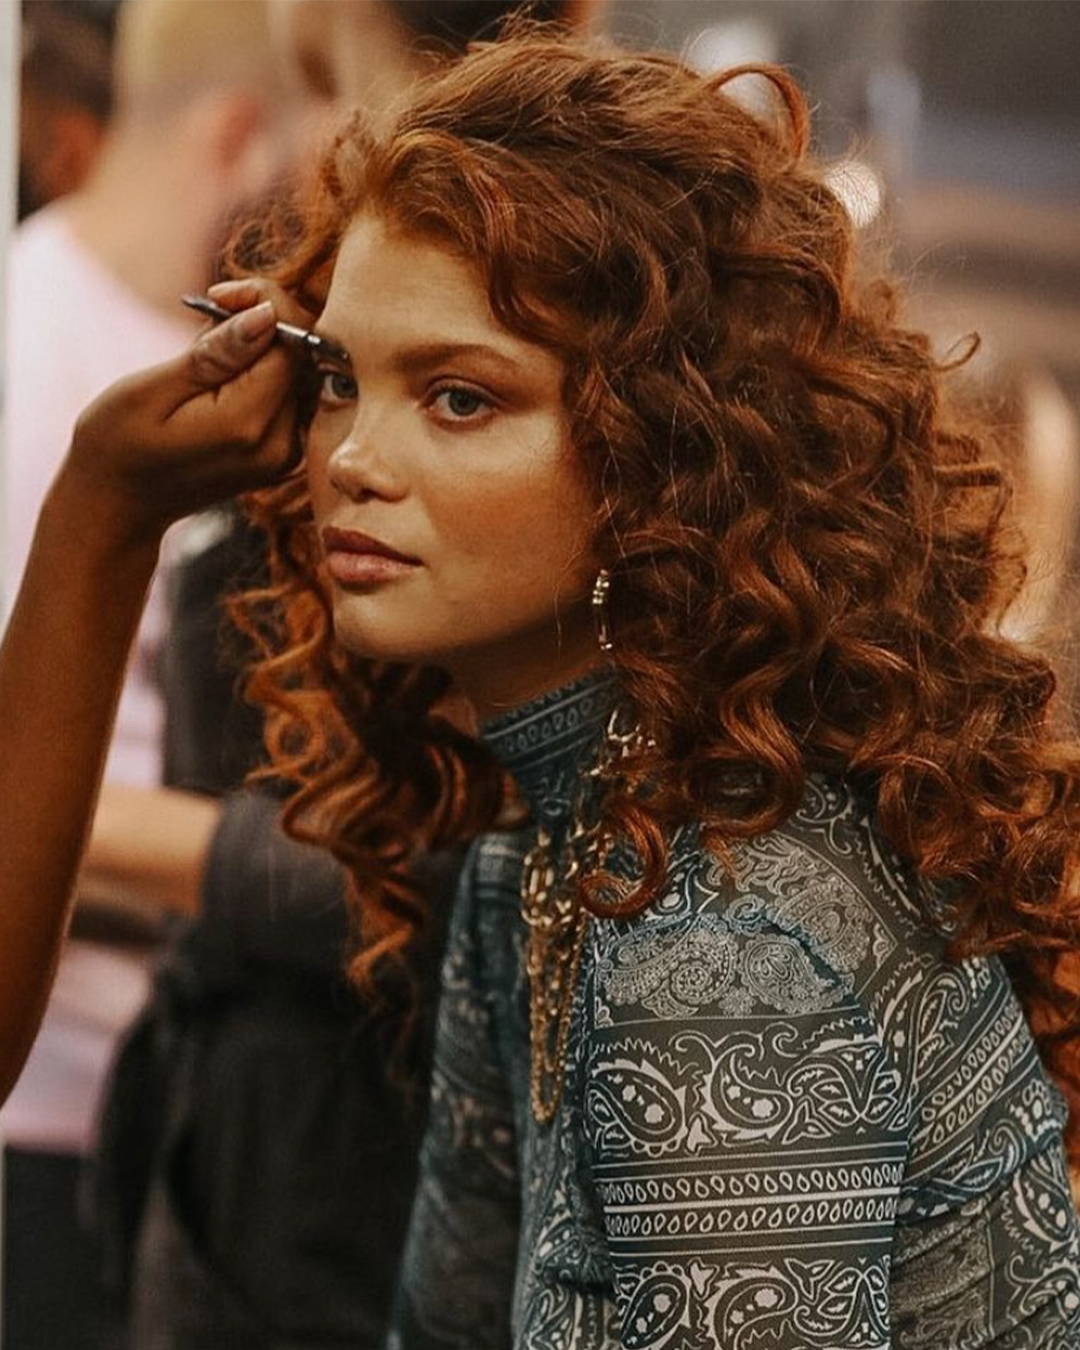 Image of Model at NYFW with voluminous red curls getting her eyebrow makeup done